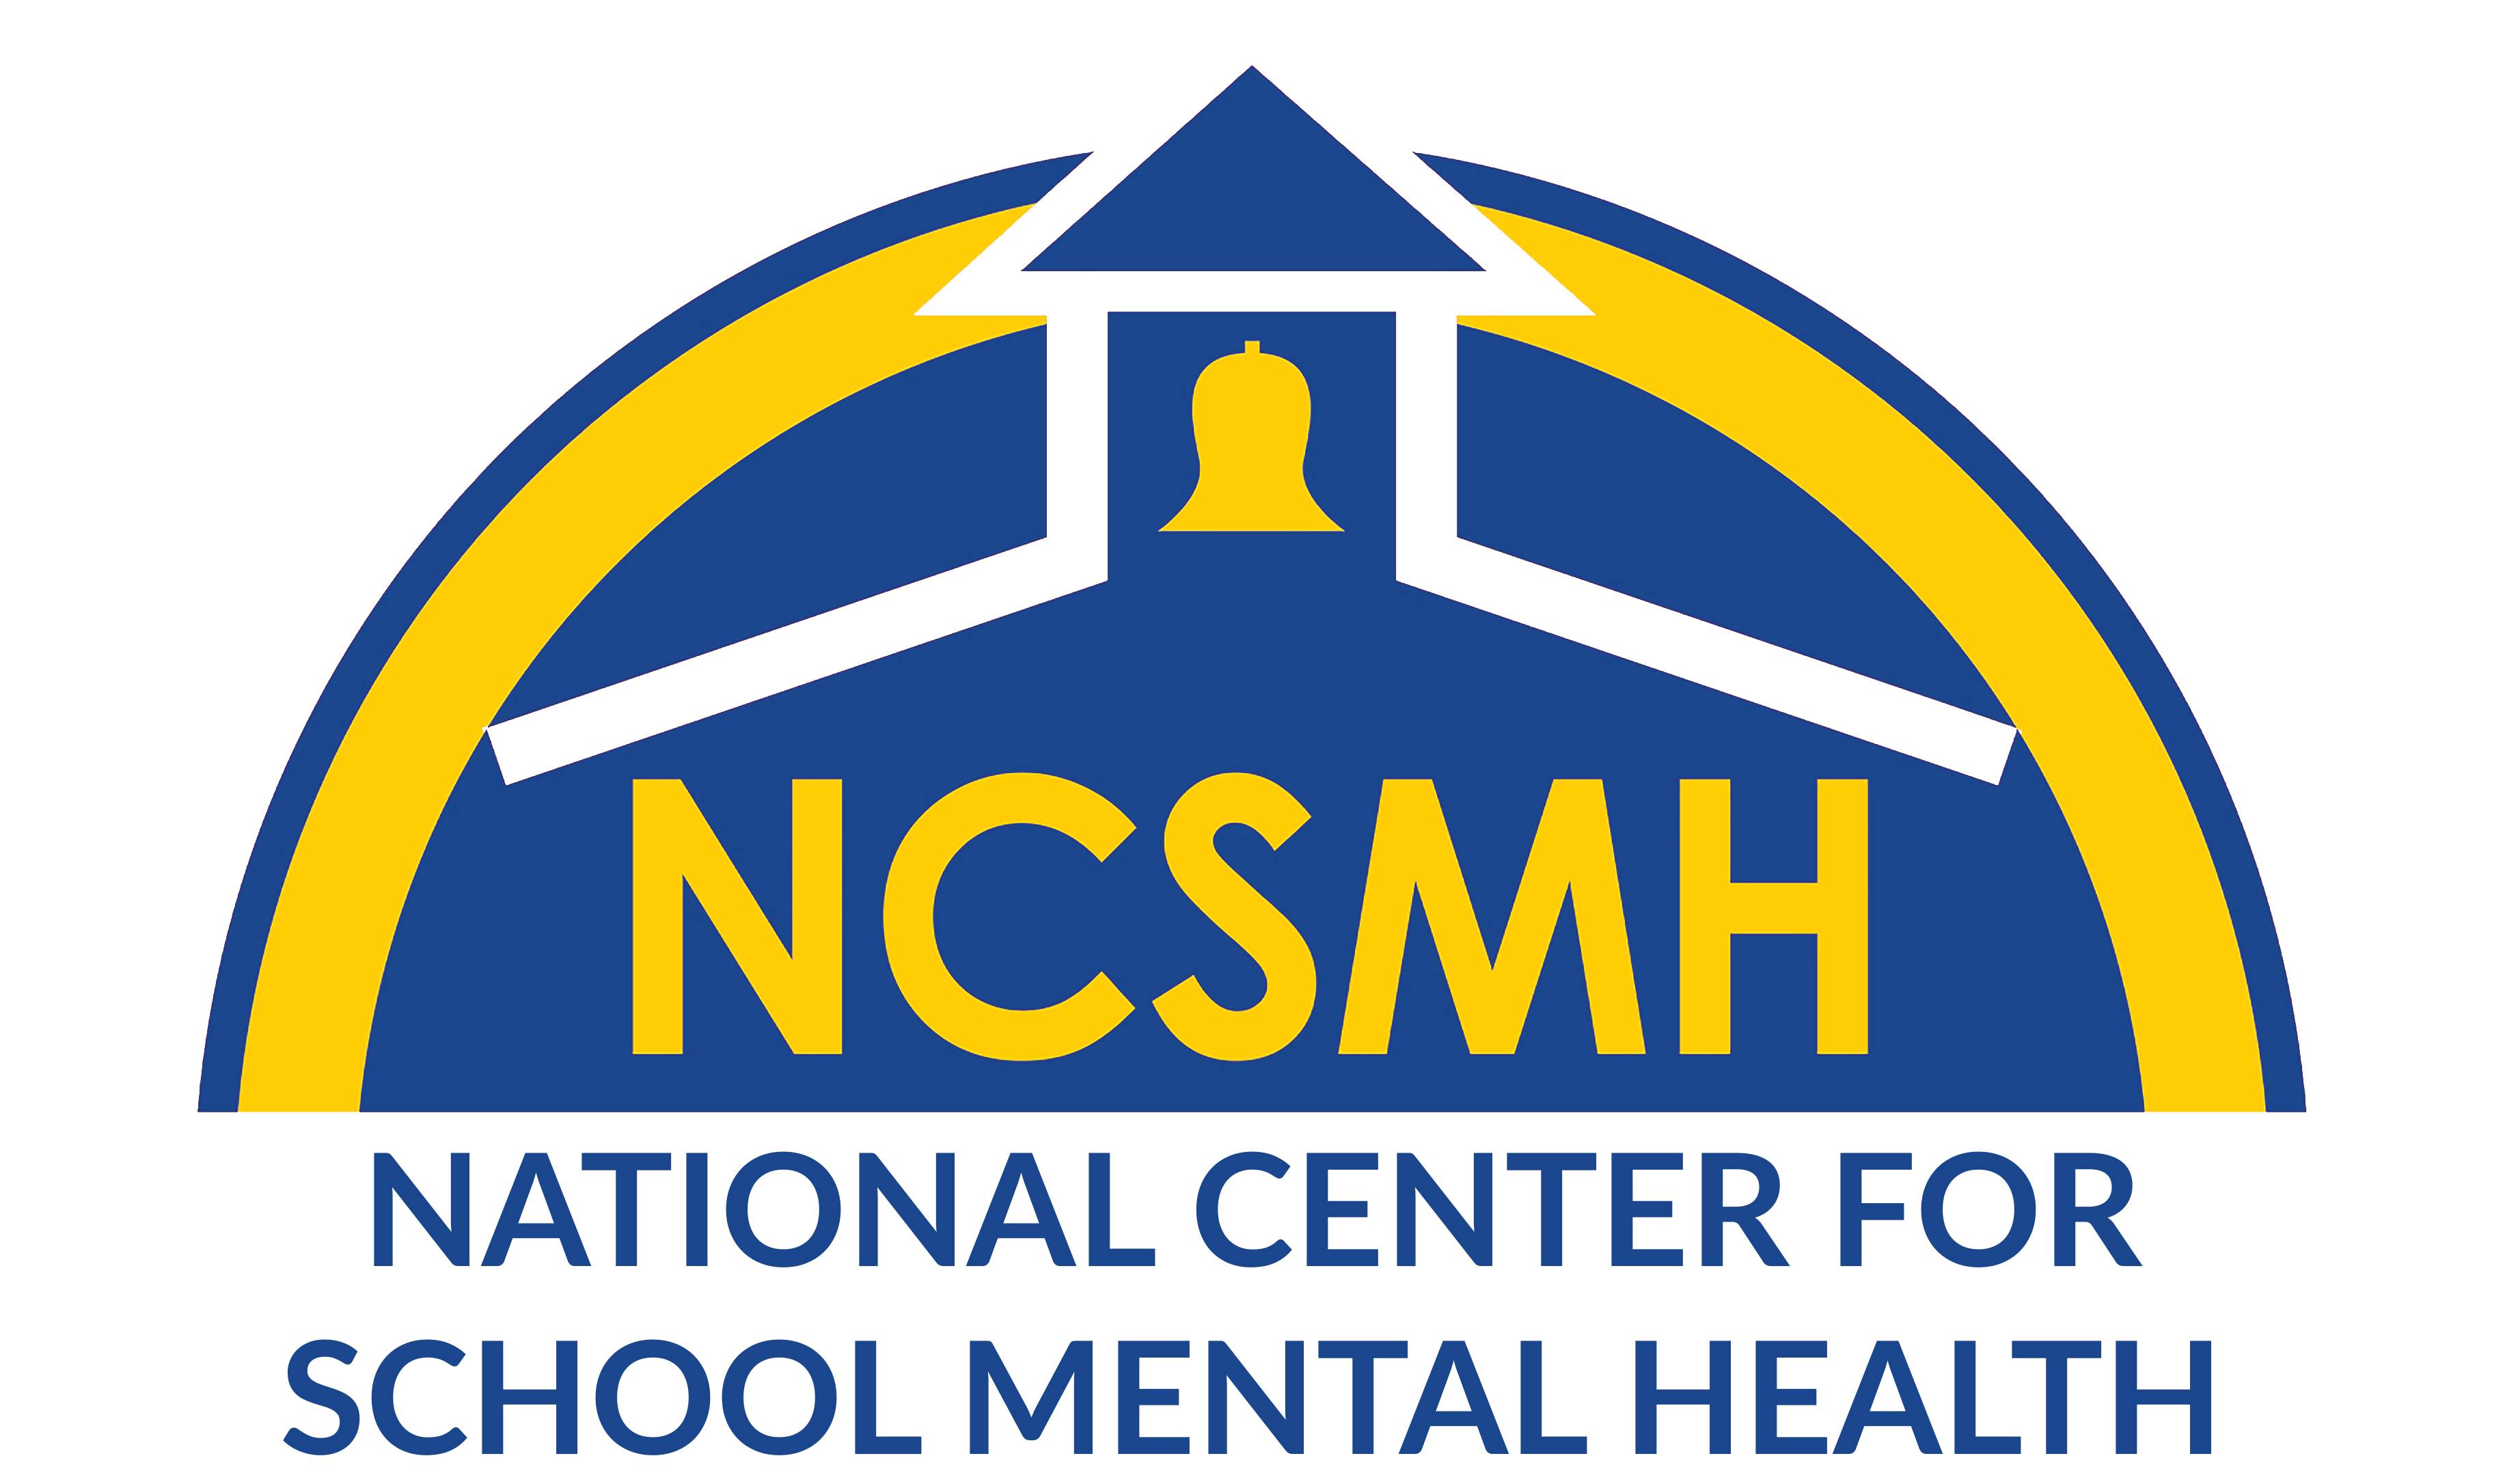 NCSMH logo of a building top with a bell and curved blue and yellow background.